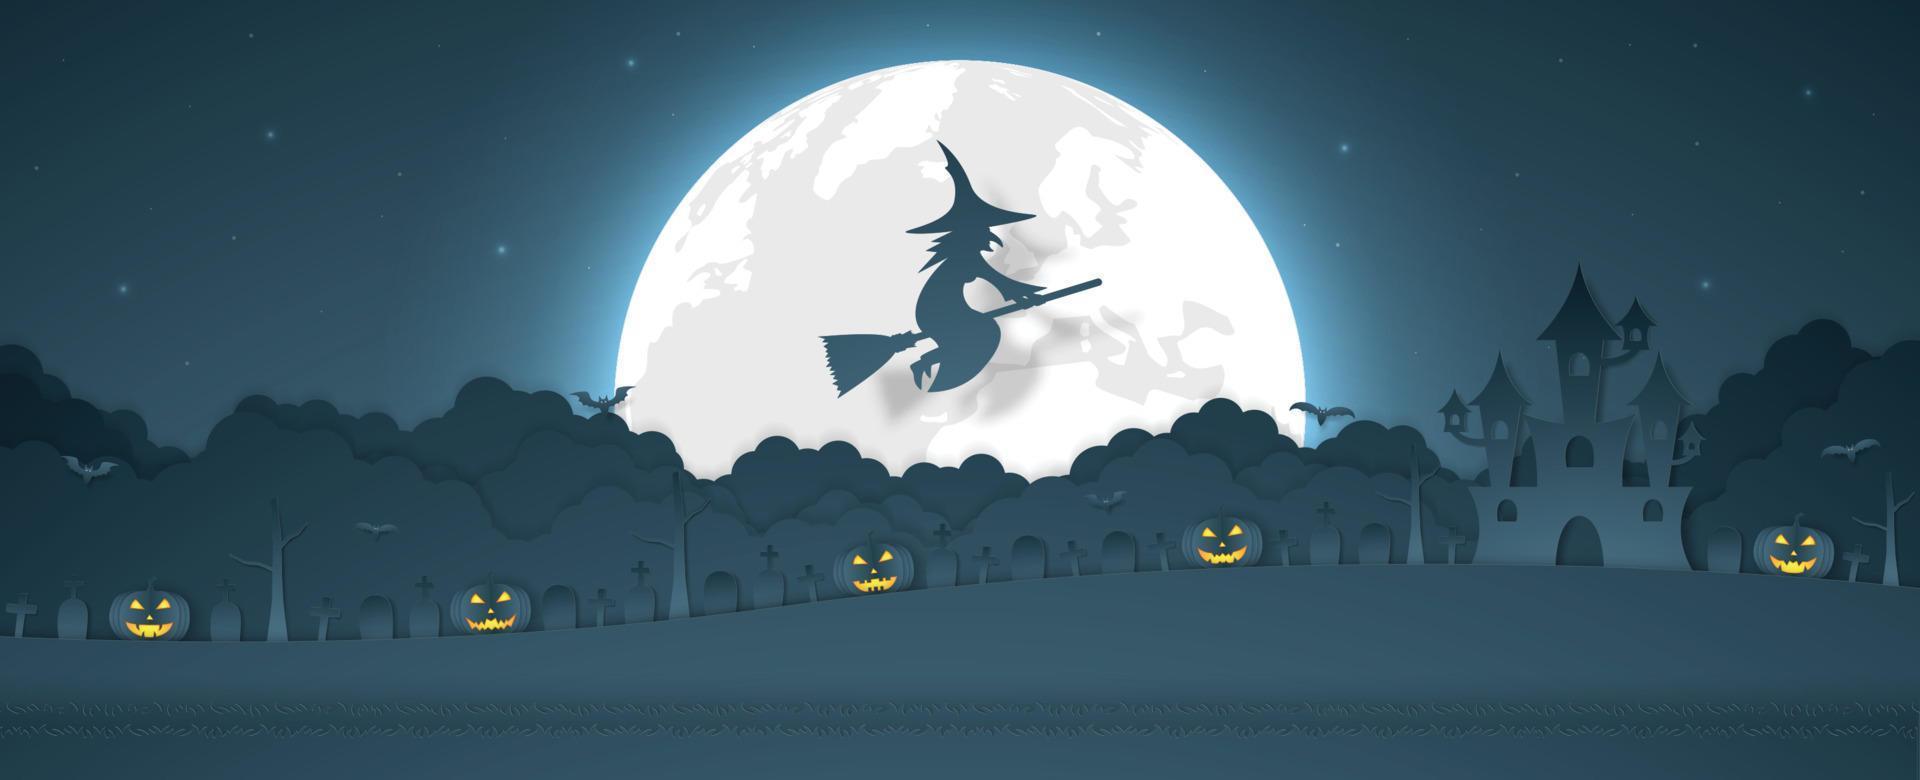 Halloween pumpkin head, witch flying above cloud with castle, graveyard on the hill and full moon, paper art style vector